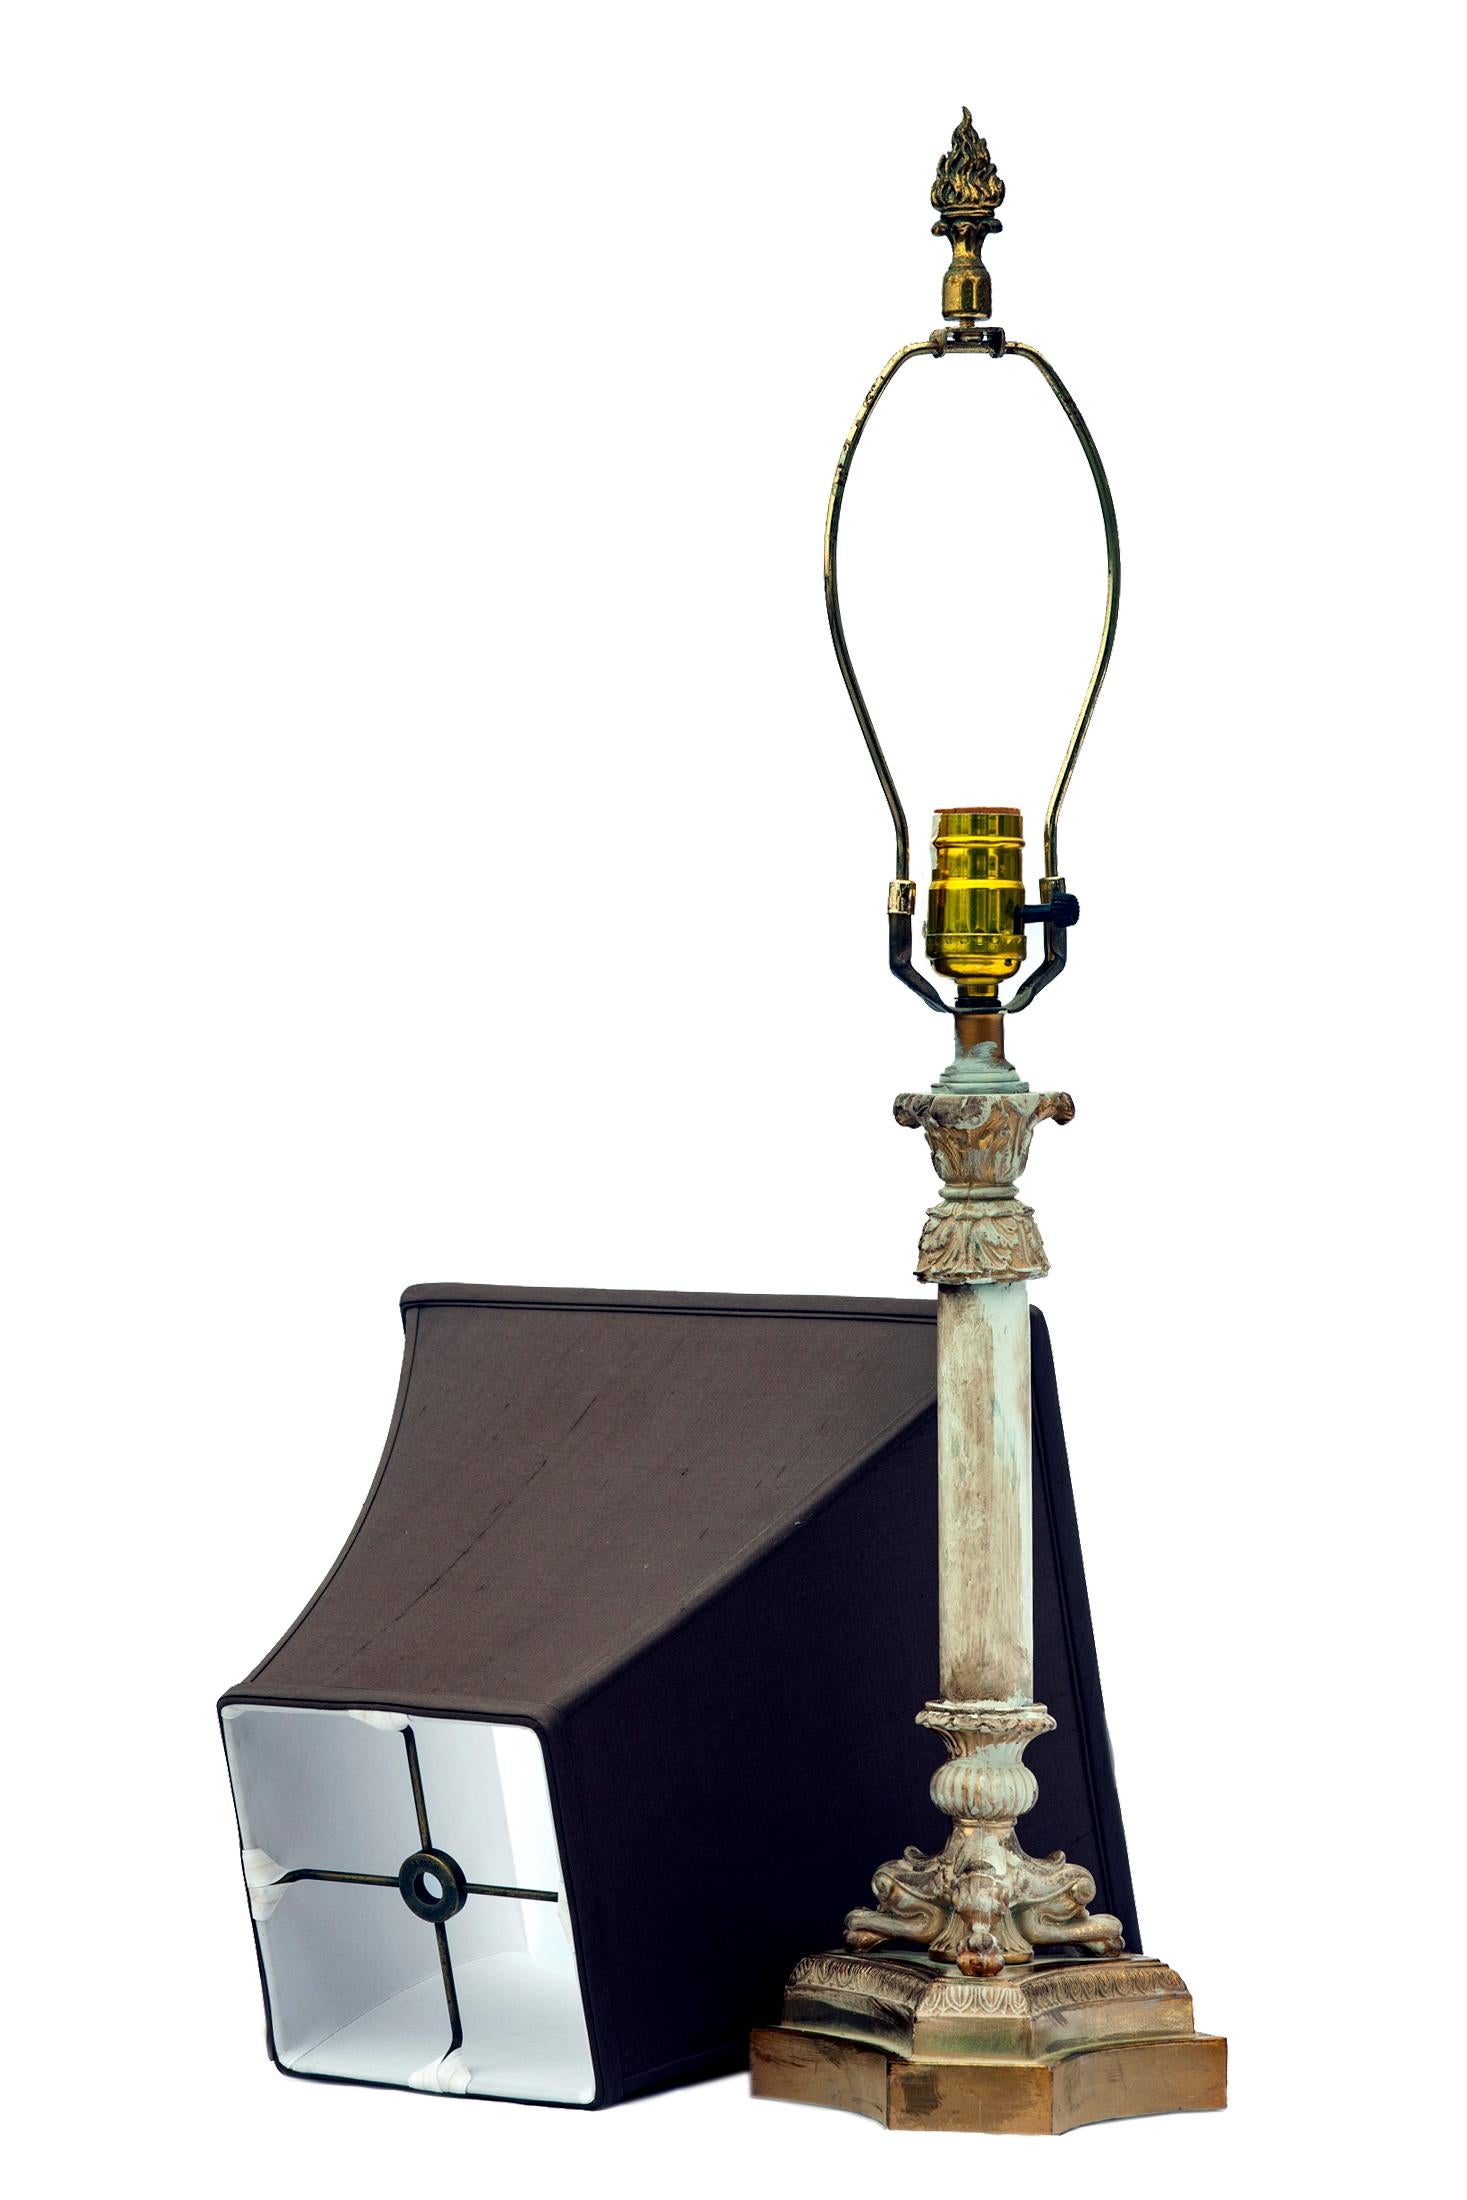 Painted Glass & Brass Candlestick Lamp / Square Bell Silk Shade in Expresso In Good Condition For Sale In Malibu, CA